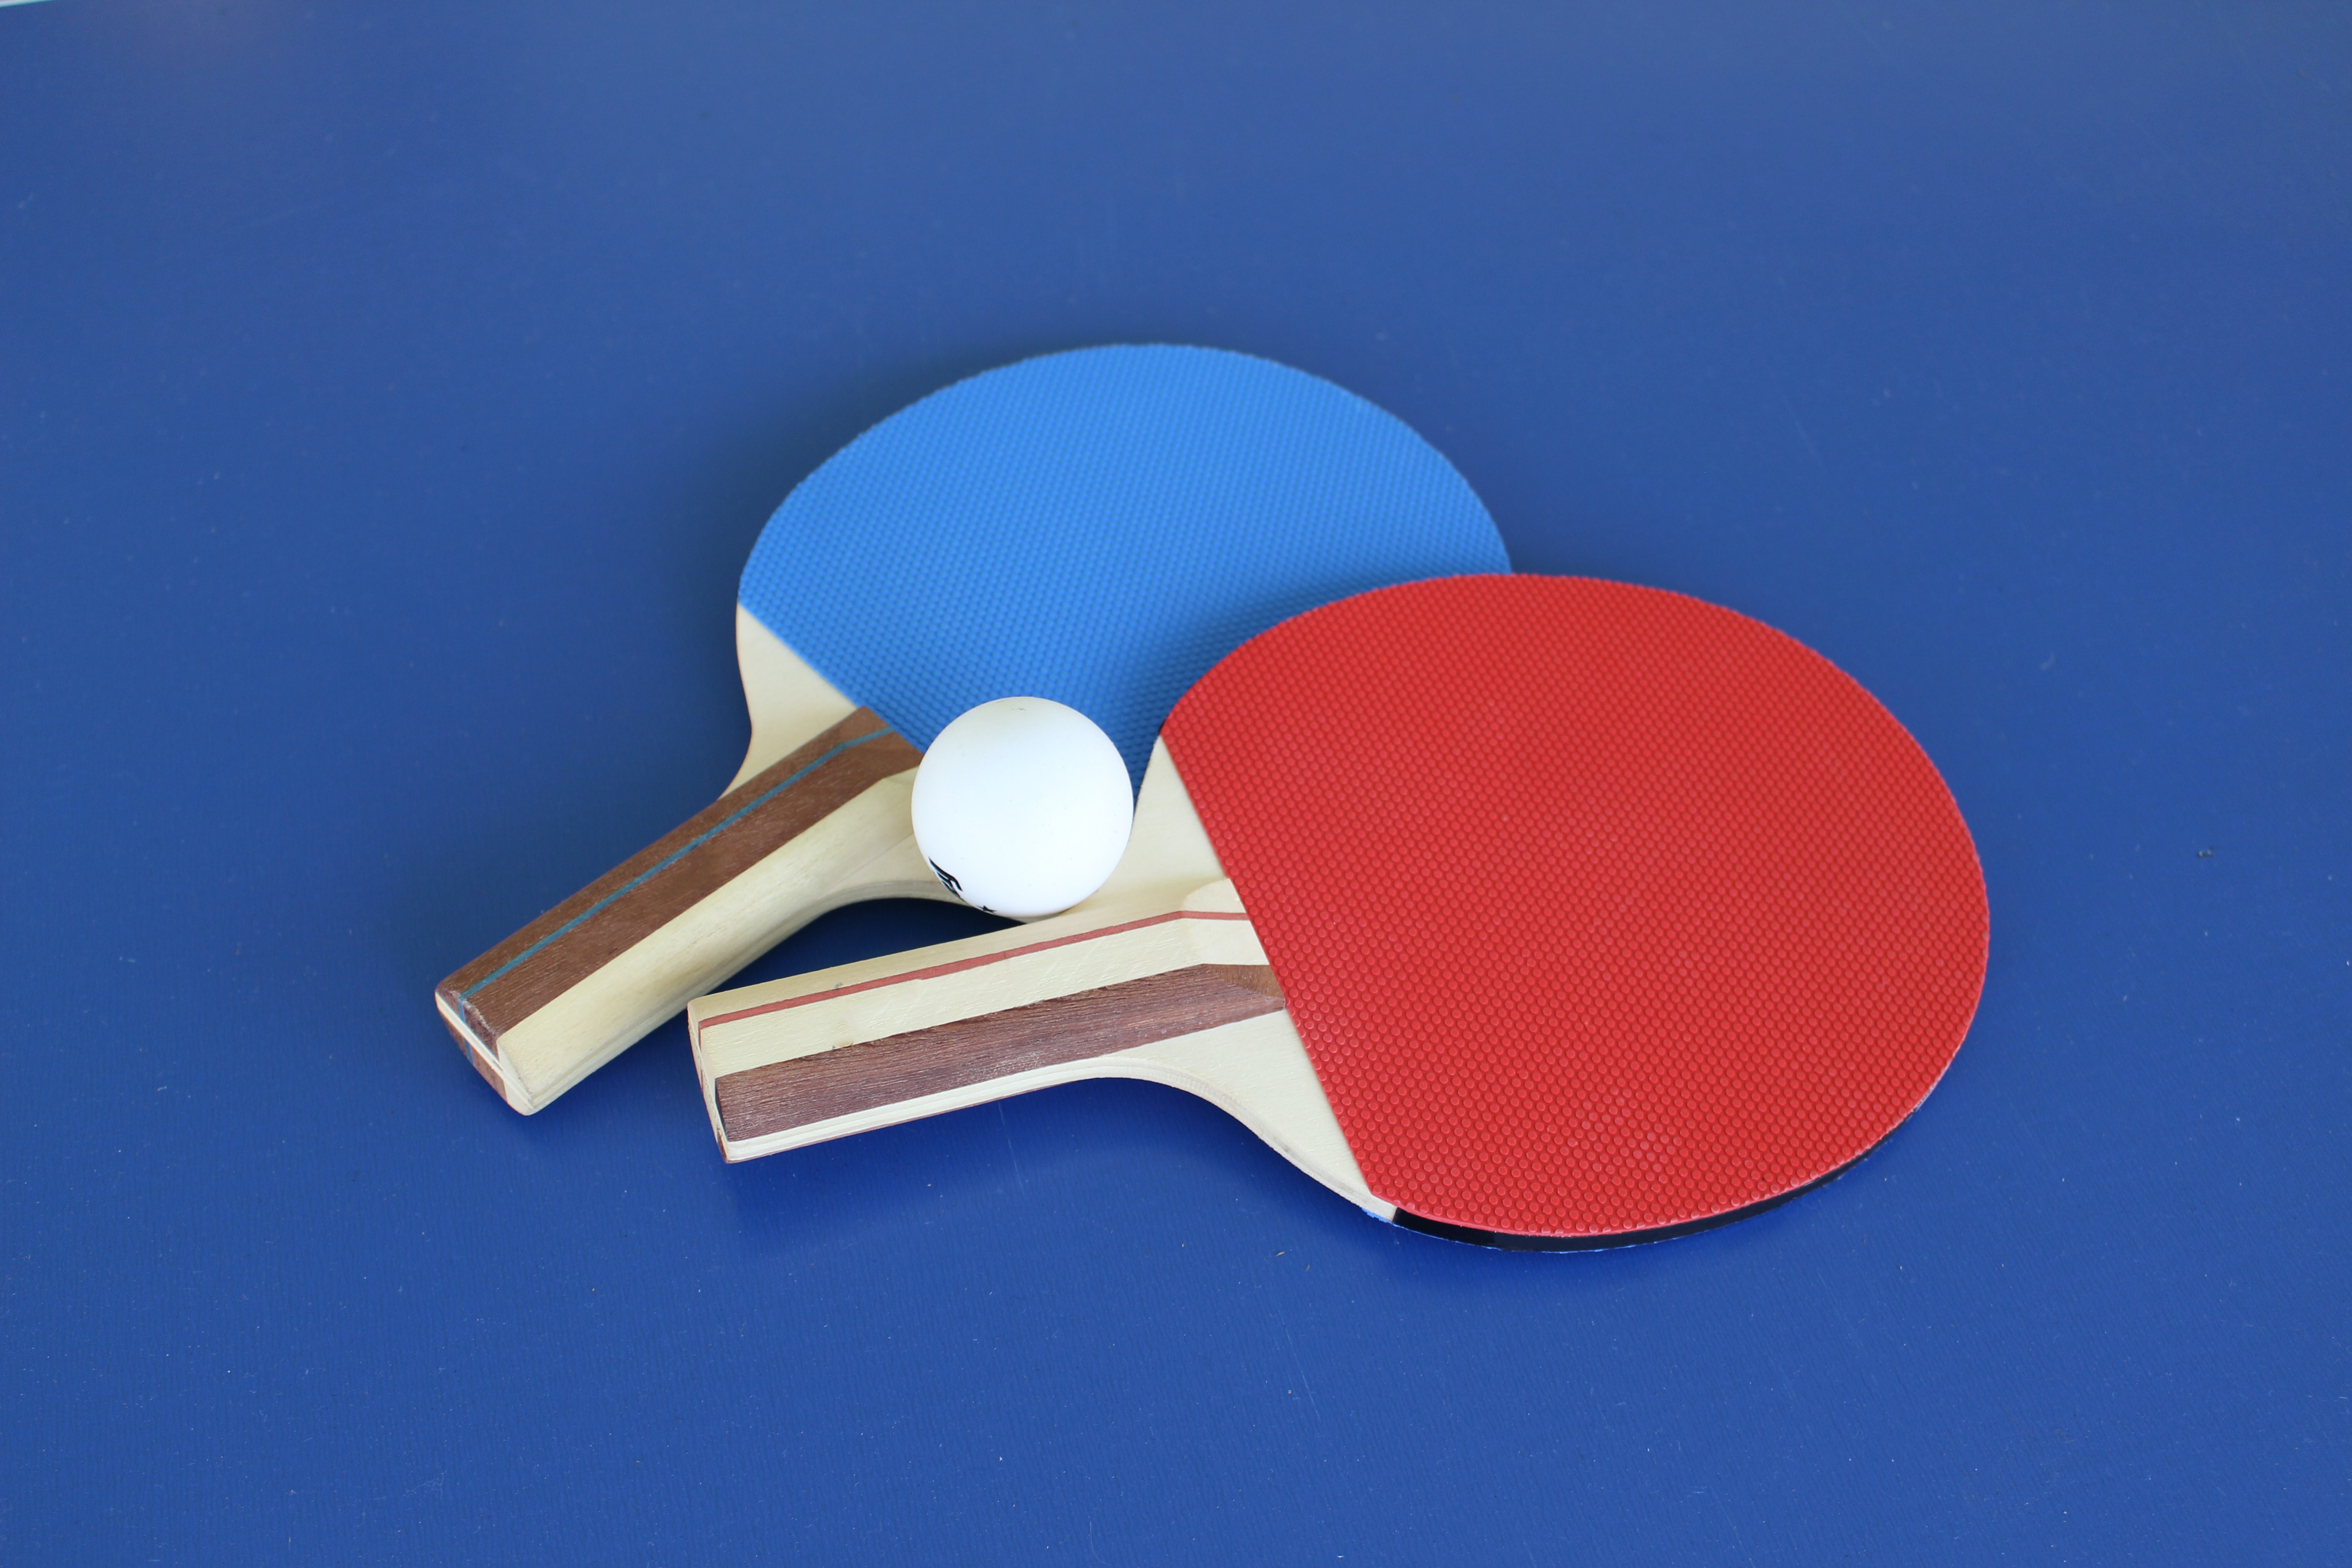 Two table tennis paddles on a blue surface